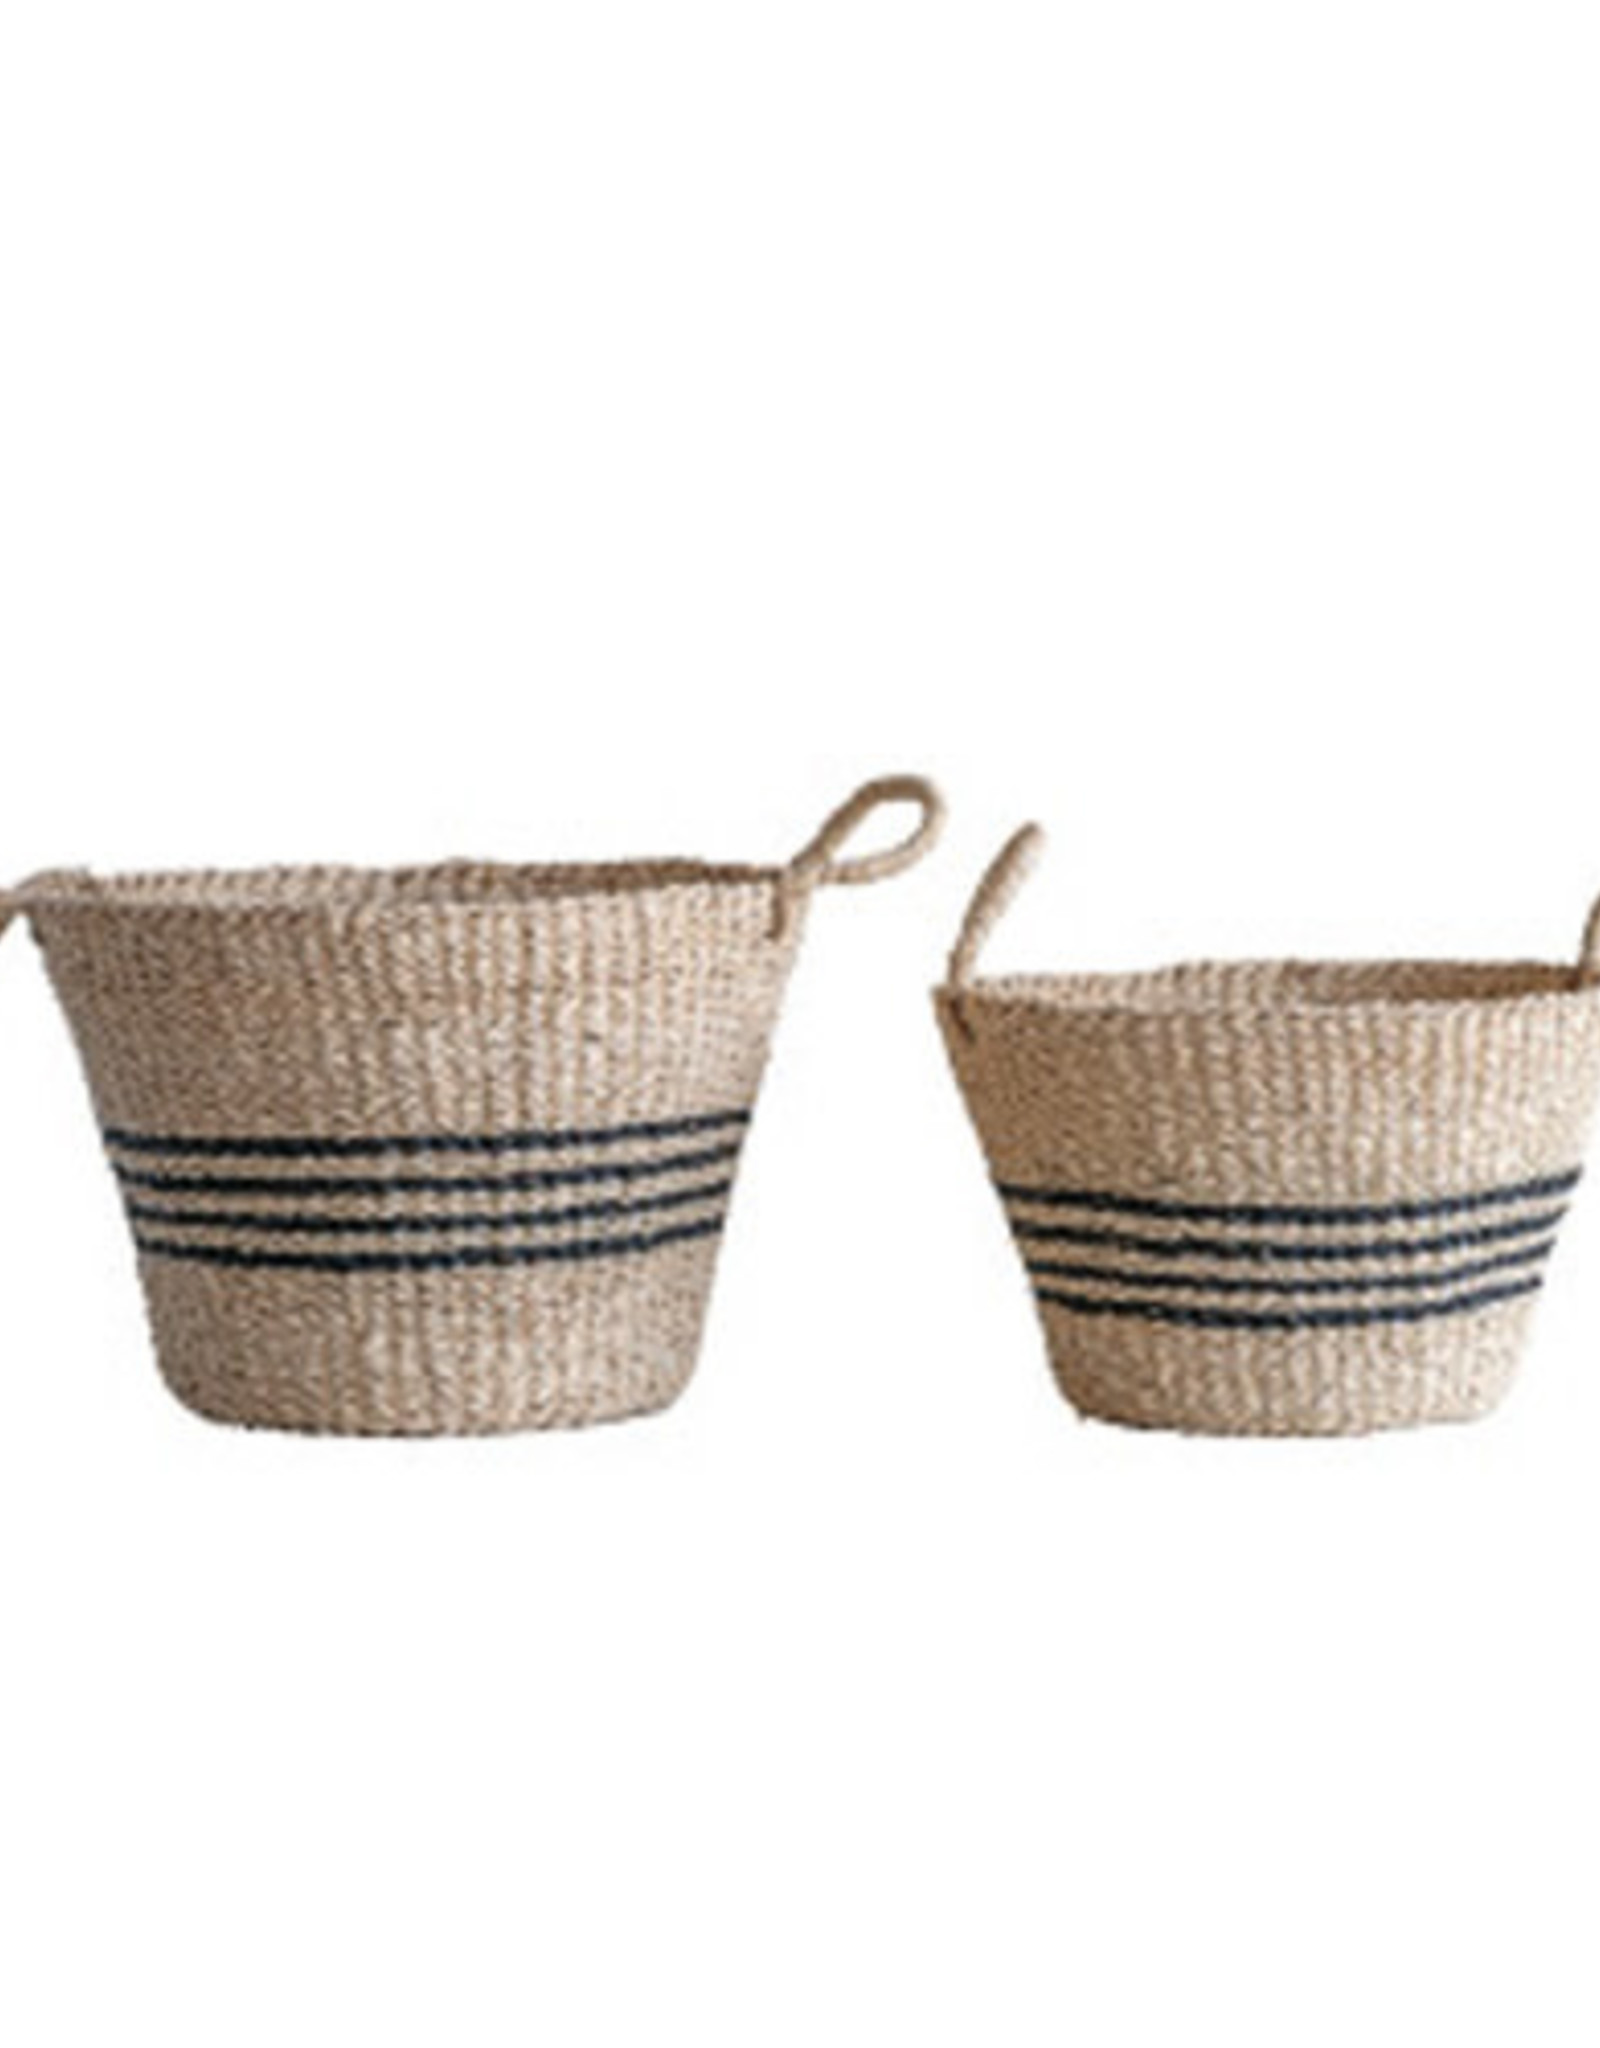 Woven Palm & Seagrass Striped Baskets